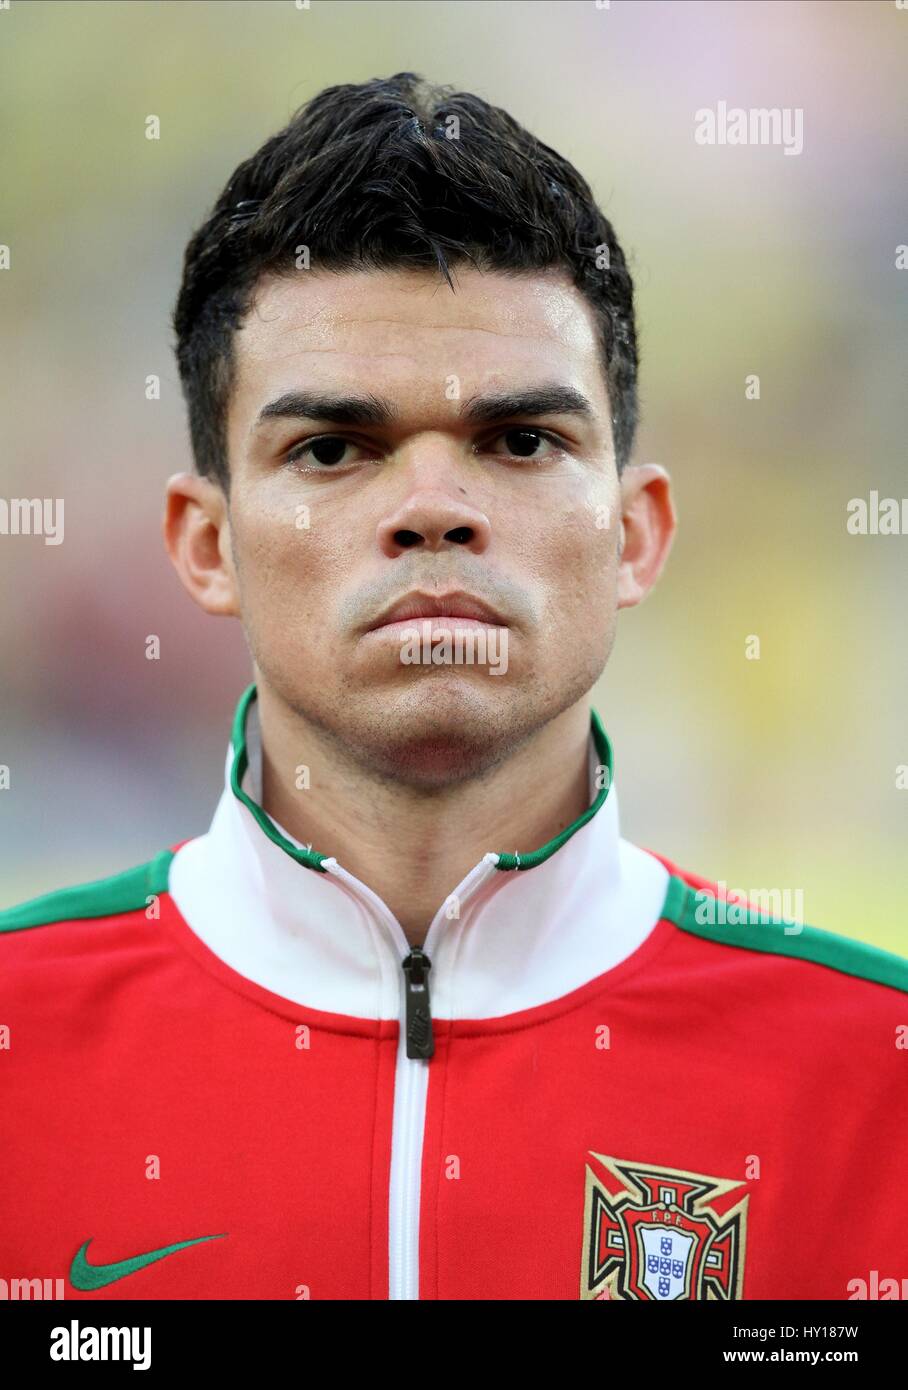 PEPE PORTUGAL REAL MADRID PORTUGAL & REAL MADRID DURBAN STADIUM DURBAN SOUTH AFRICA 25 June 2010 Stock Photo